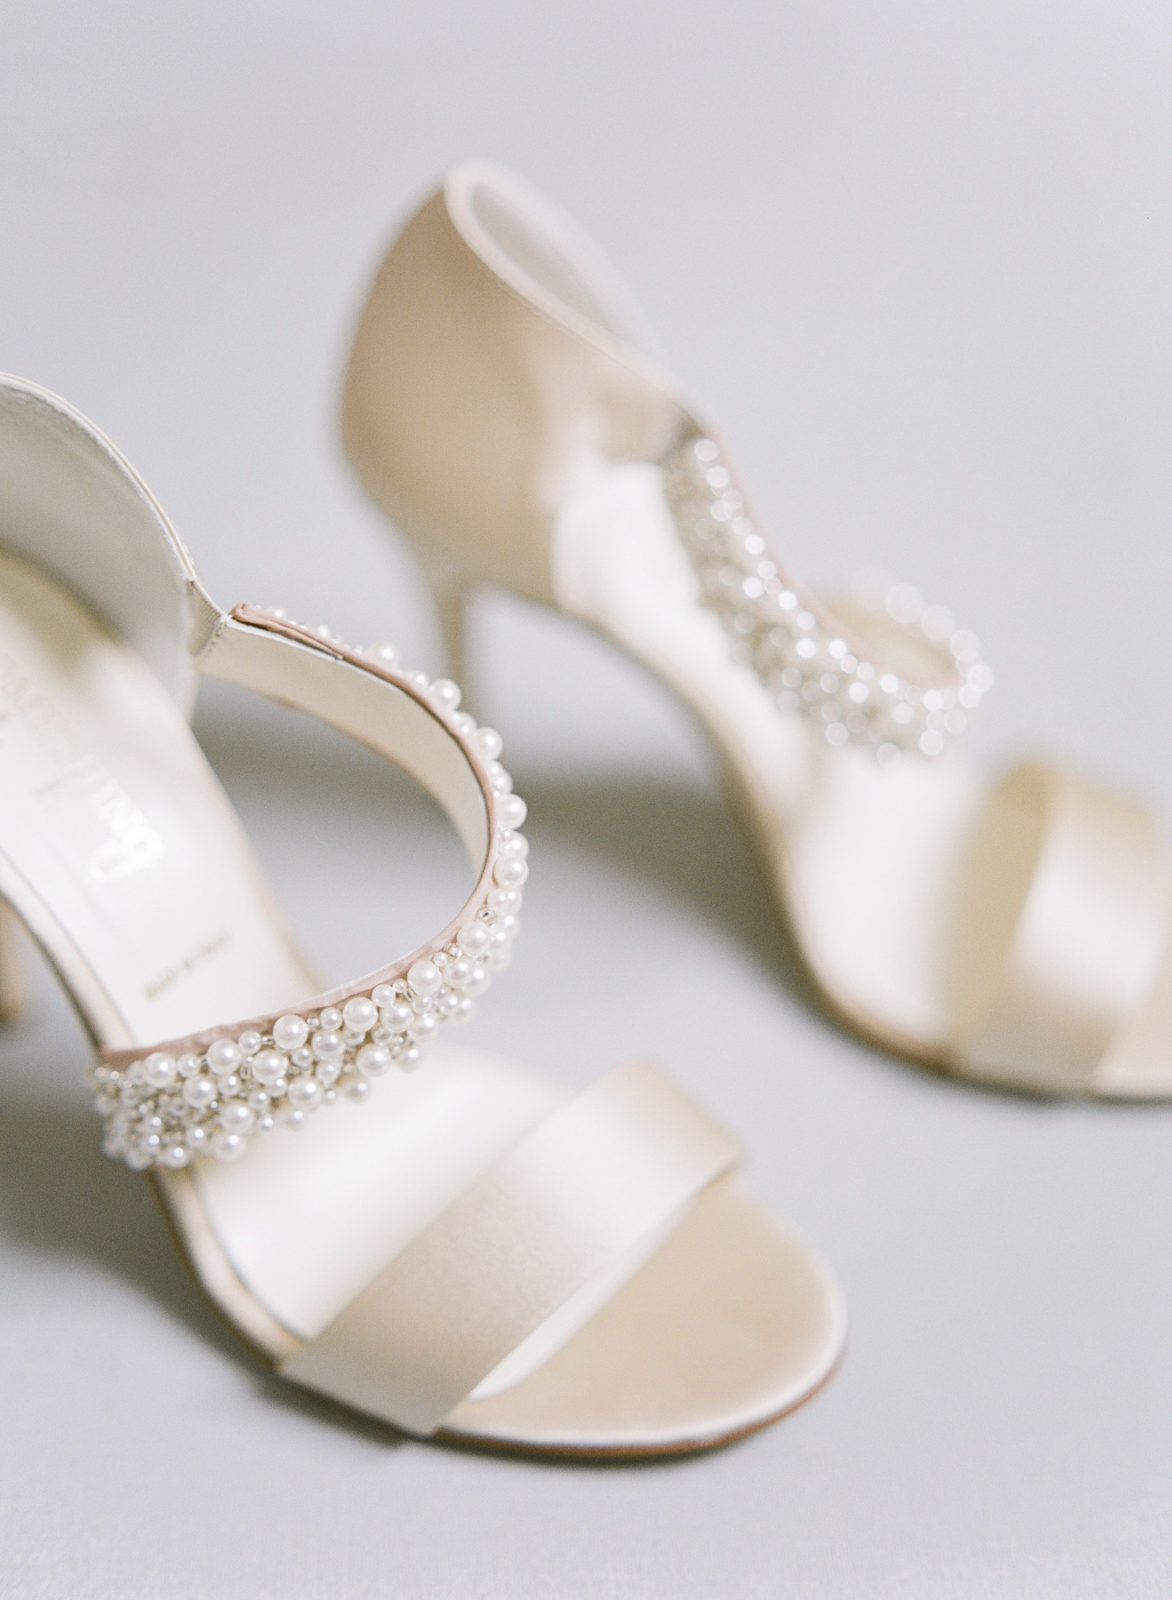 Laurel Hall Wedding Photographer | Estate Wedding Venue | Midwest Film Photographer | Molly Carr Photography | Pearl Bridal Shoes